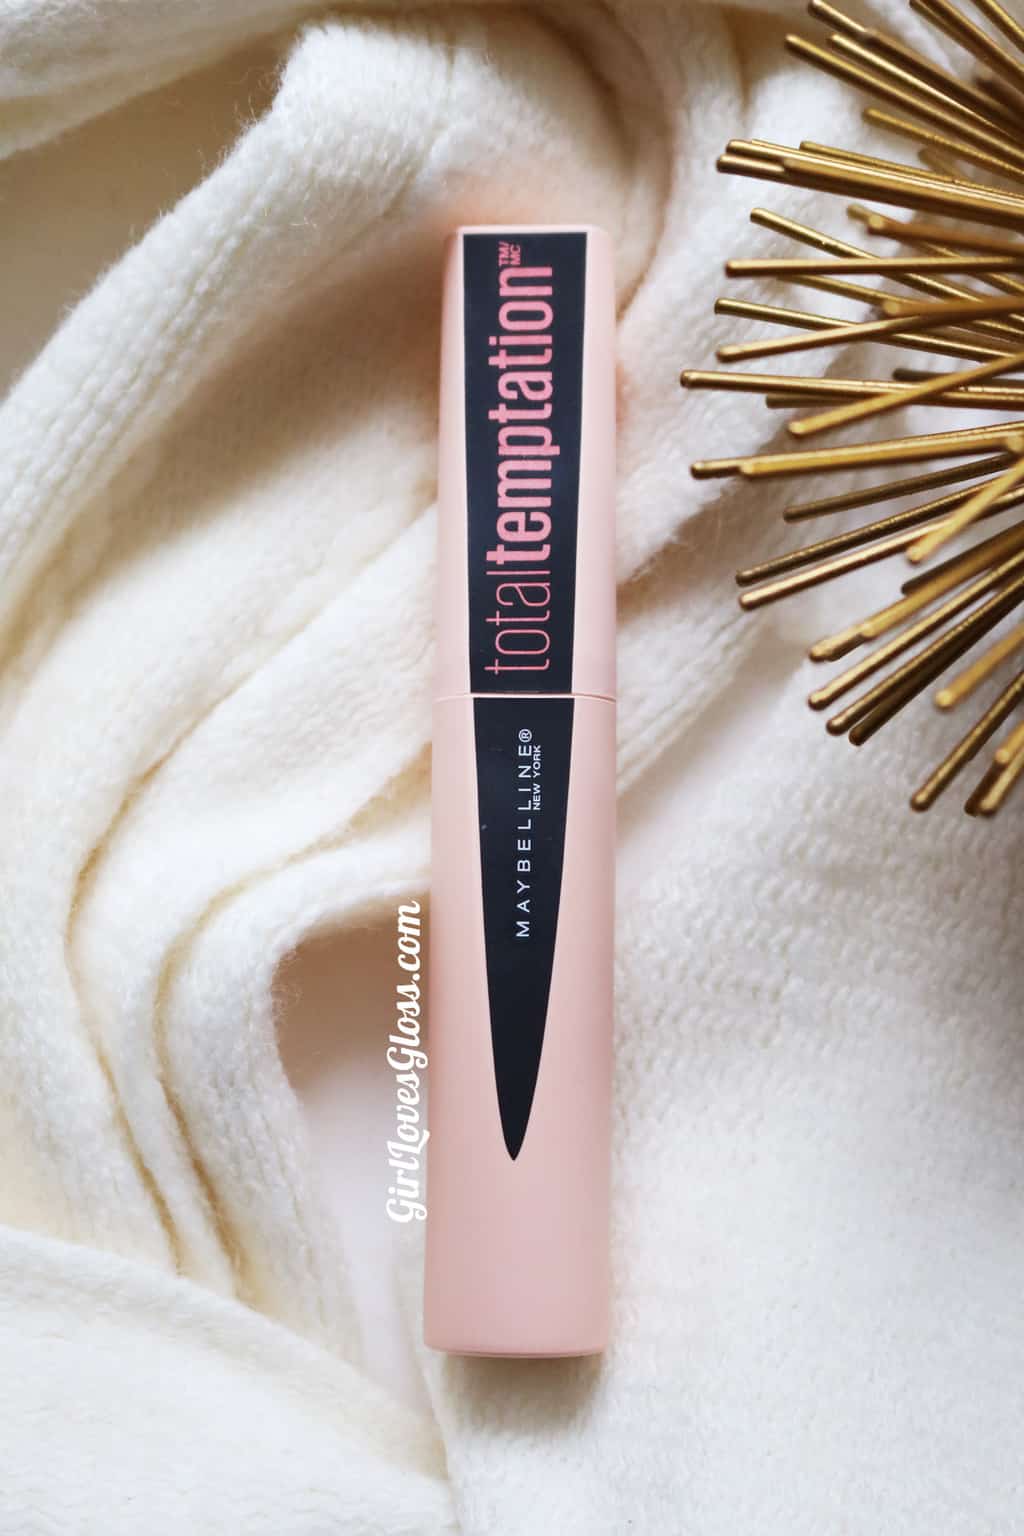 Maybelline Total Temptation Mascara Review